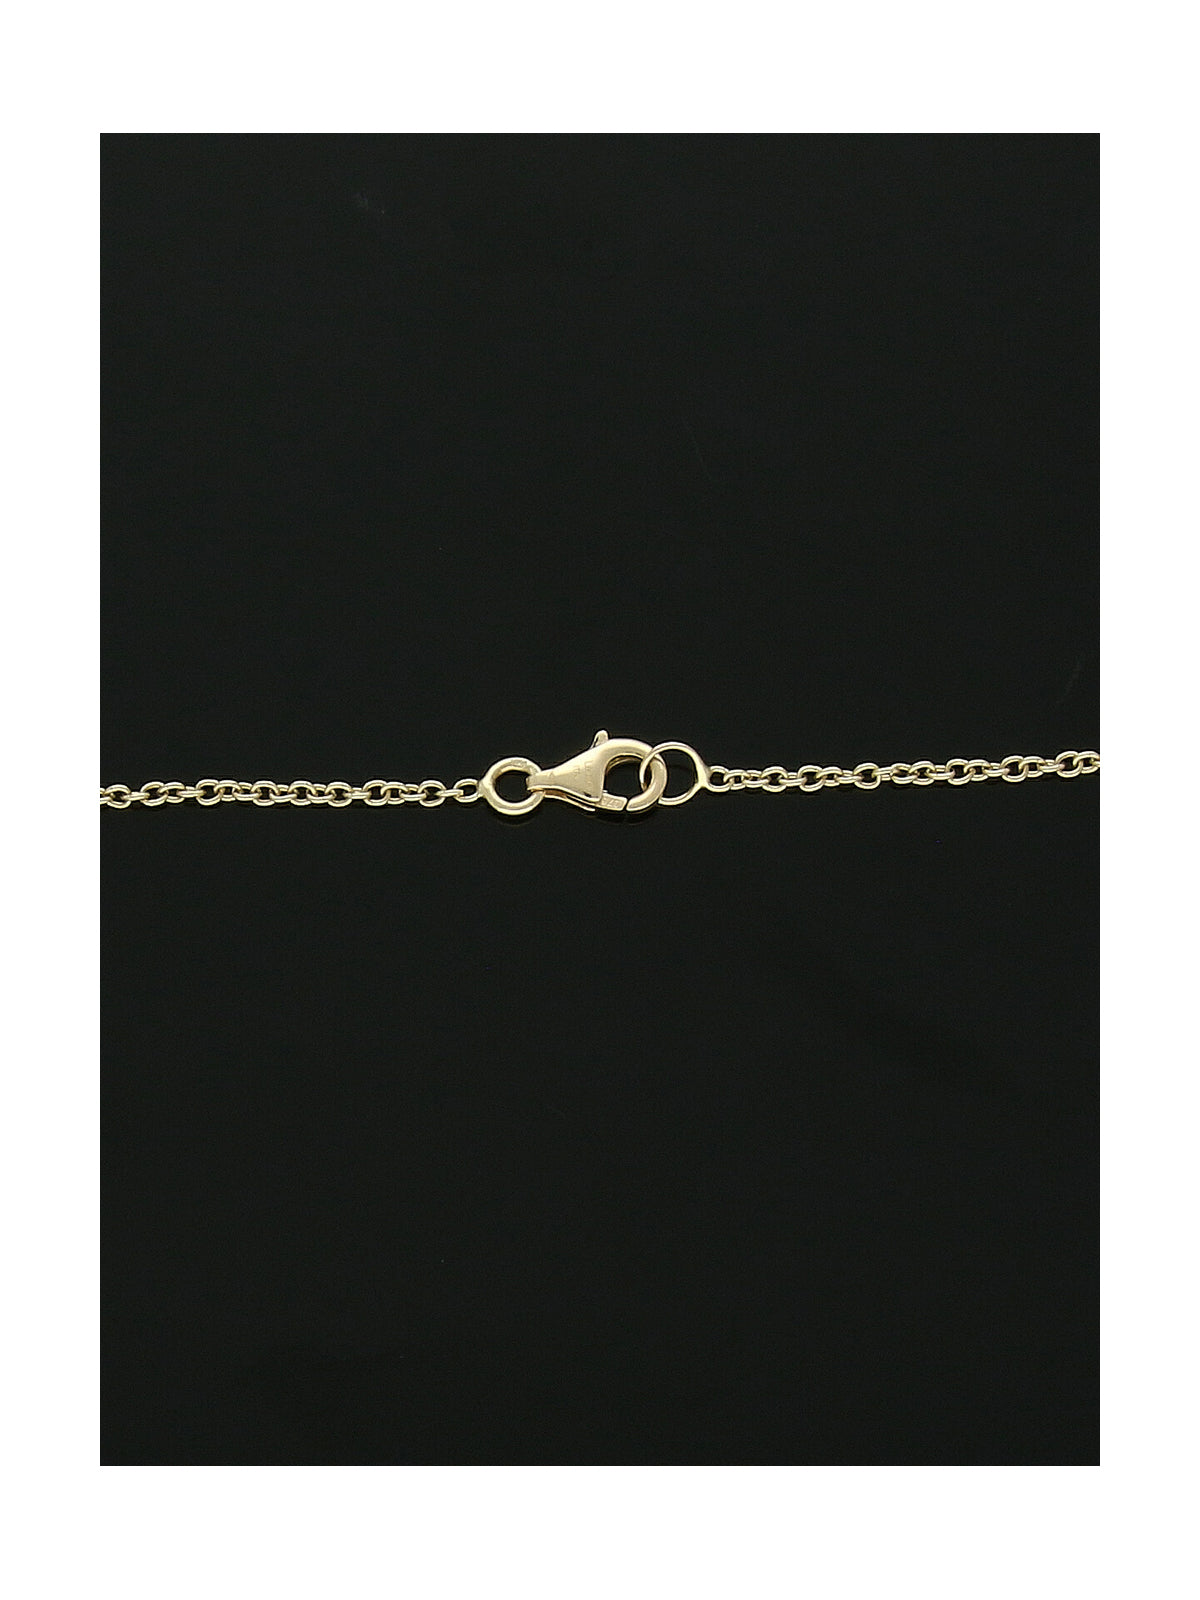 Ovular Bead Station Necklace in 9ct Yellow Gold